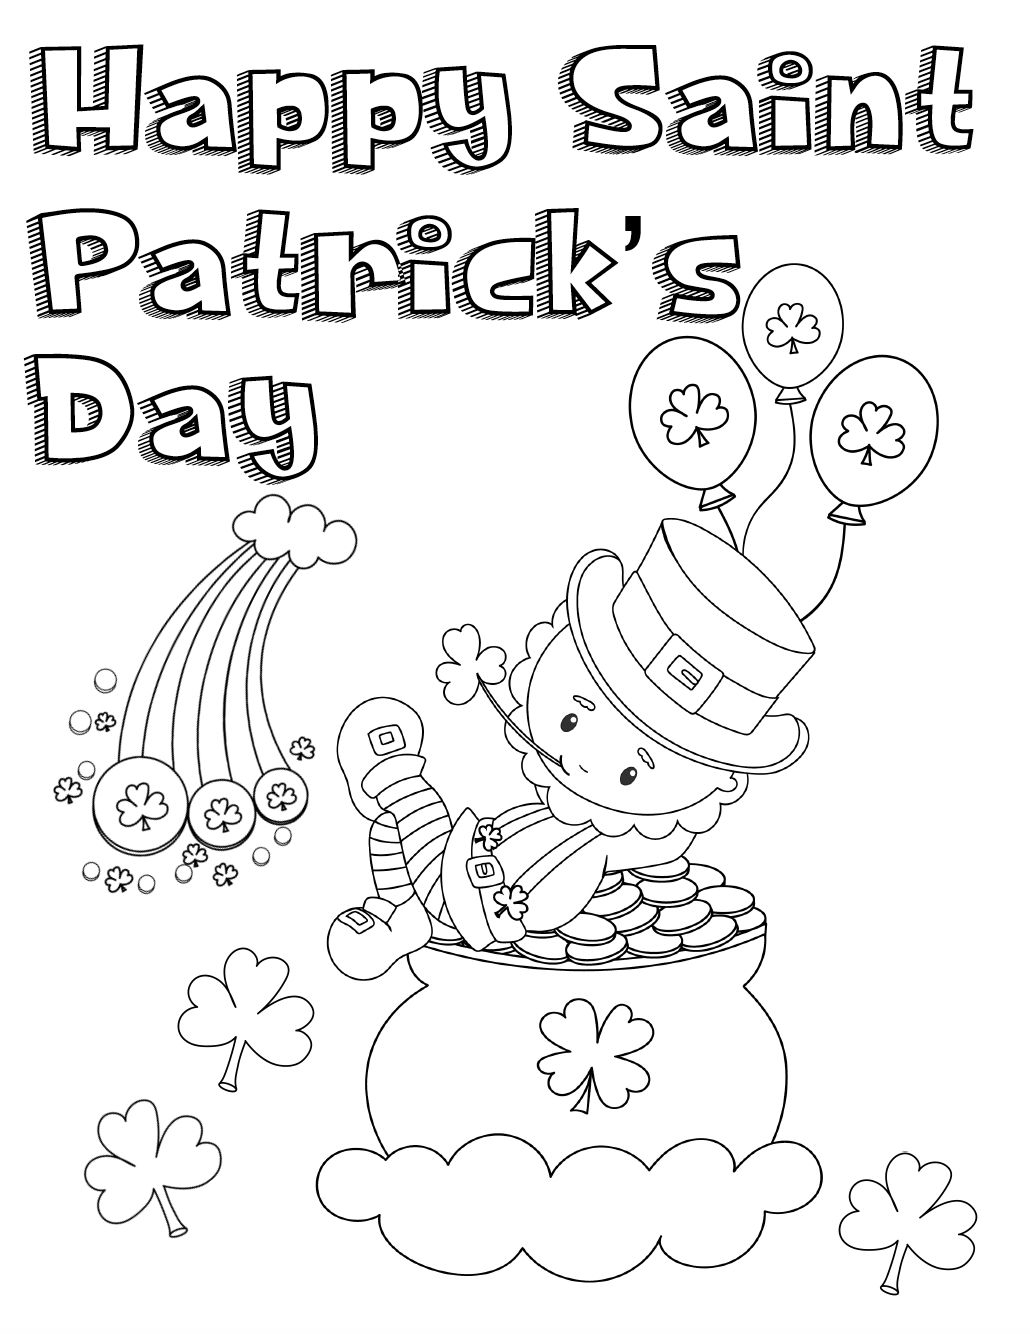 Free Printable St. Patrick&amp;#039;s Day Coloring Pages: 4 Designs - Free Printable Saint Patrick Coloring Pages